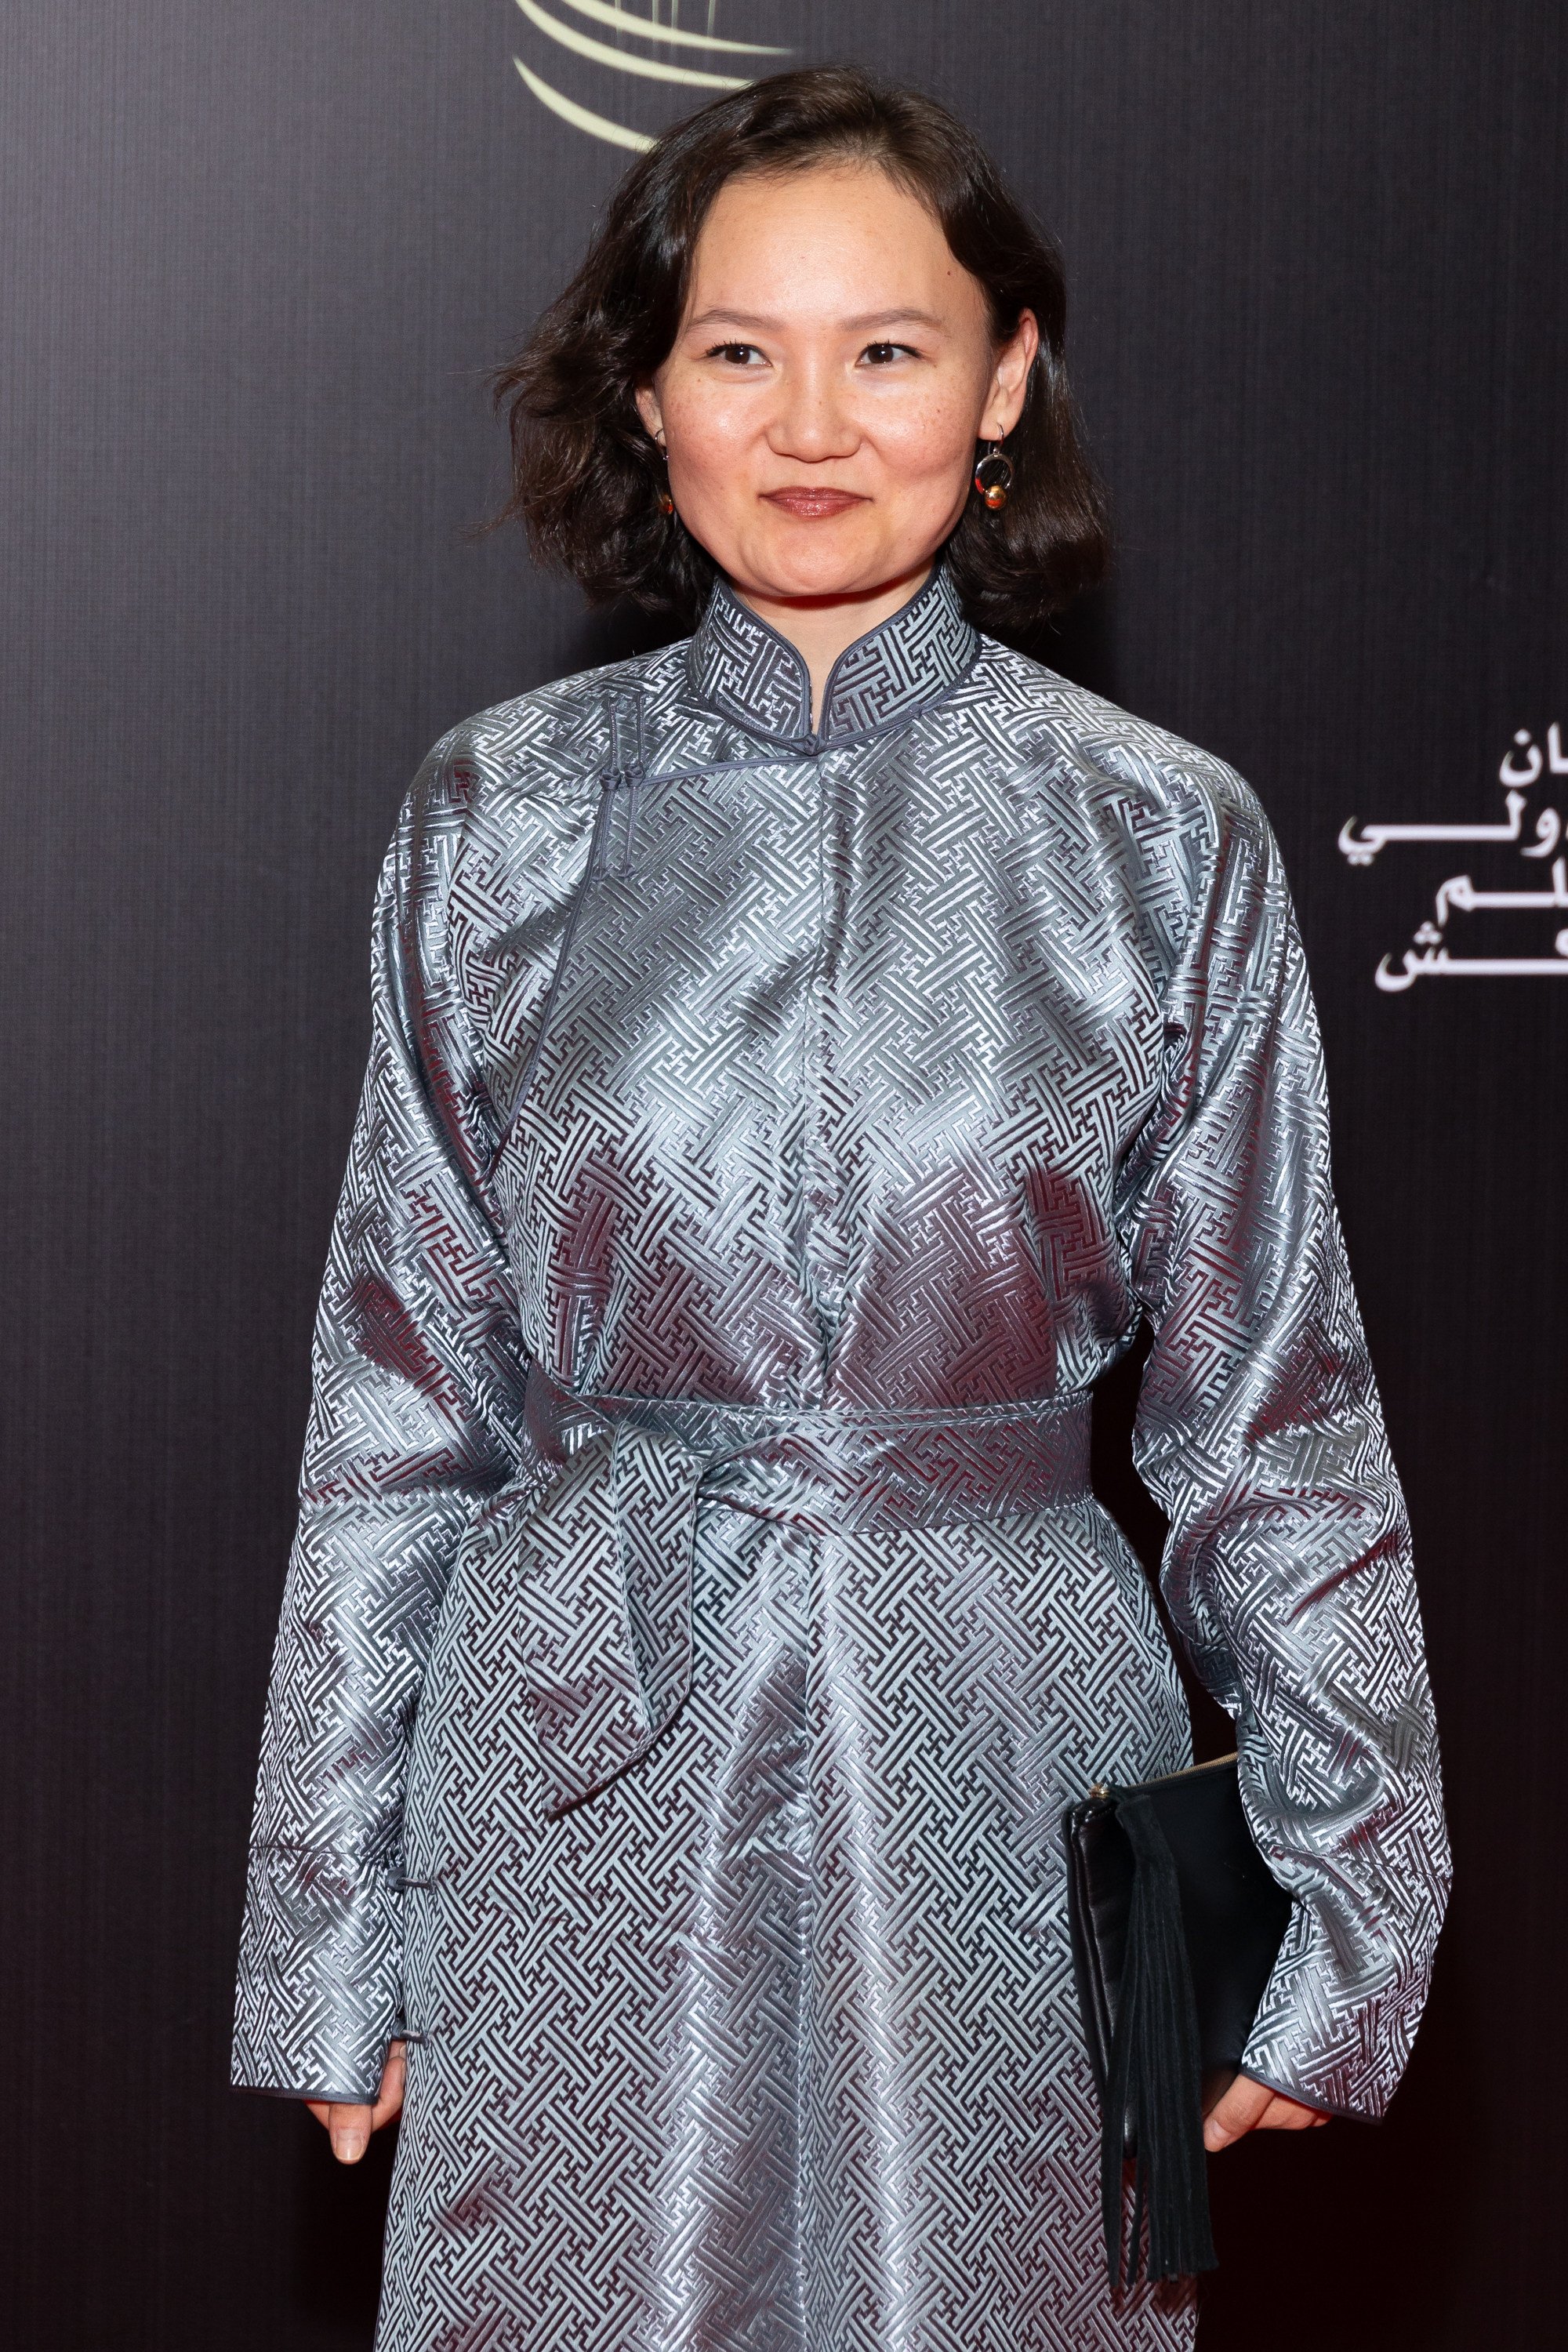 Lkhagvadulam Purev-Ochir on the red carpet at the 20th Marrakech International Film Festival in Morocco. Photo: Getty Images